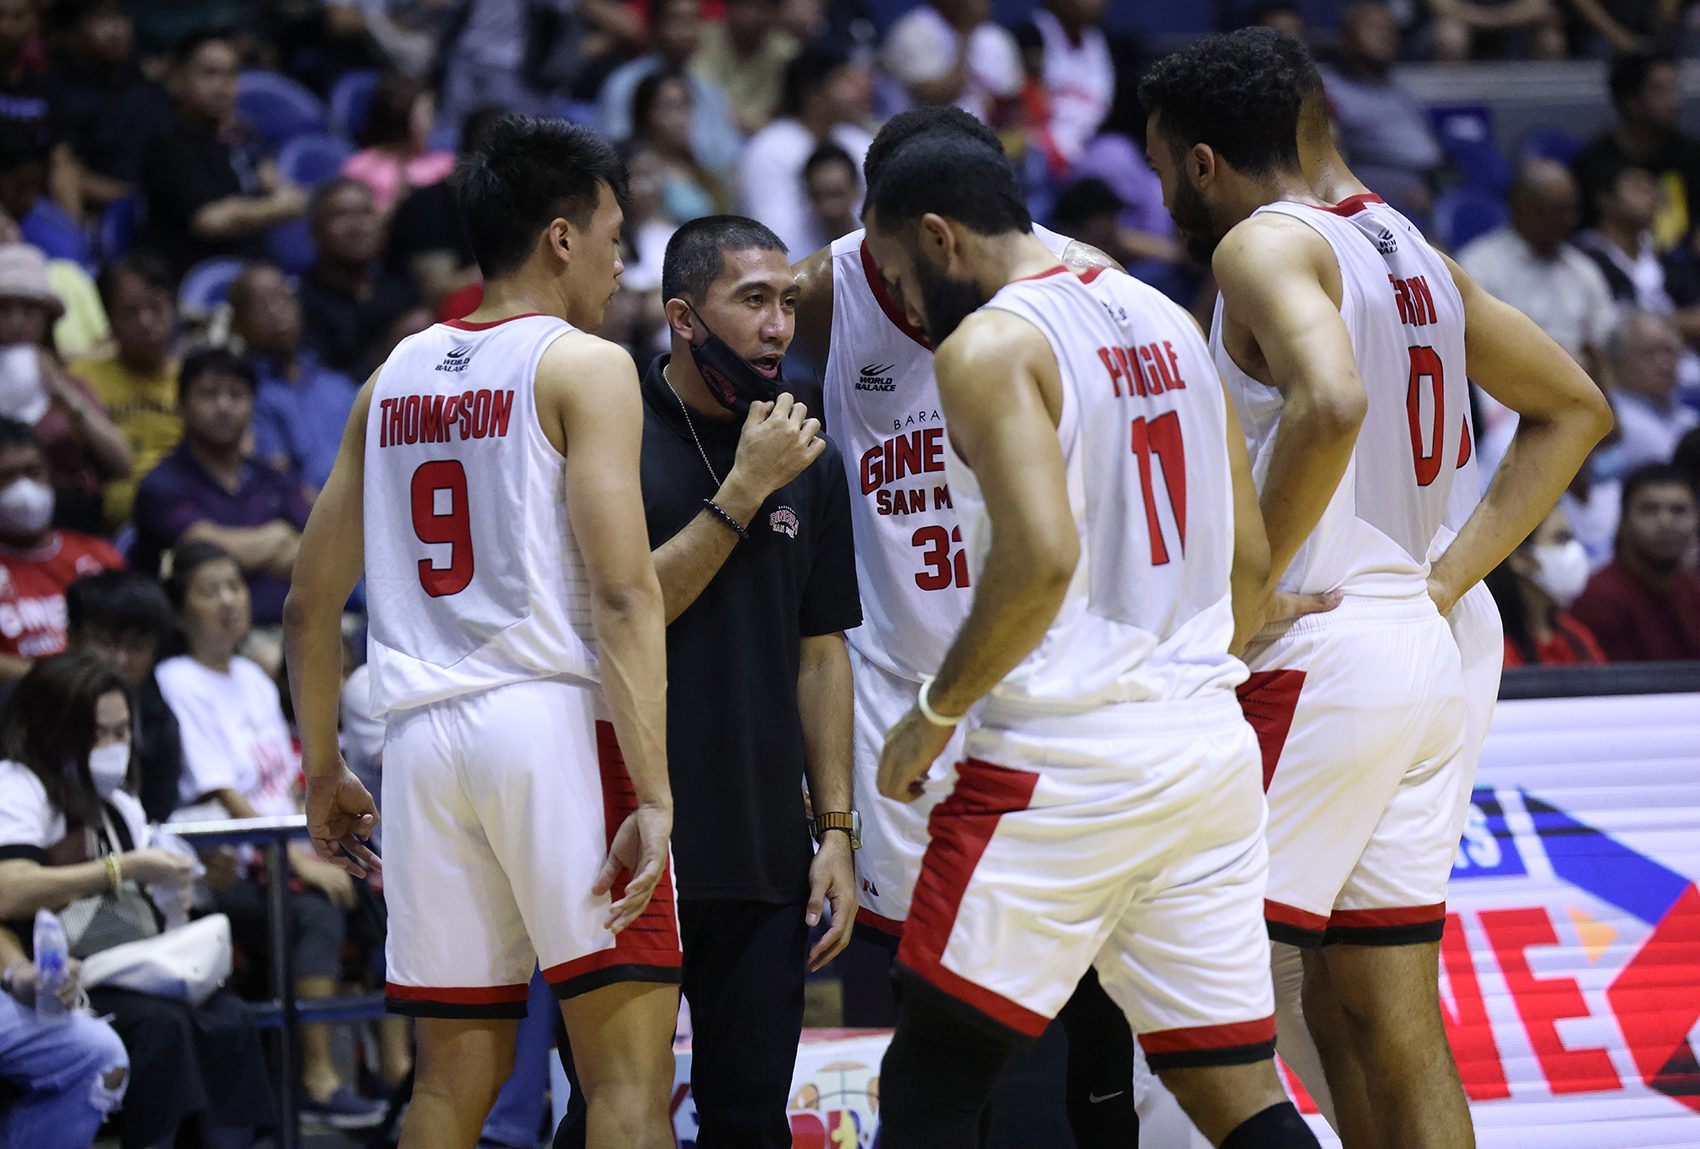 Tenorio back on court, but at Gilas sidelines, for now